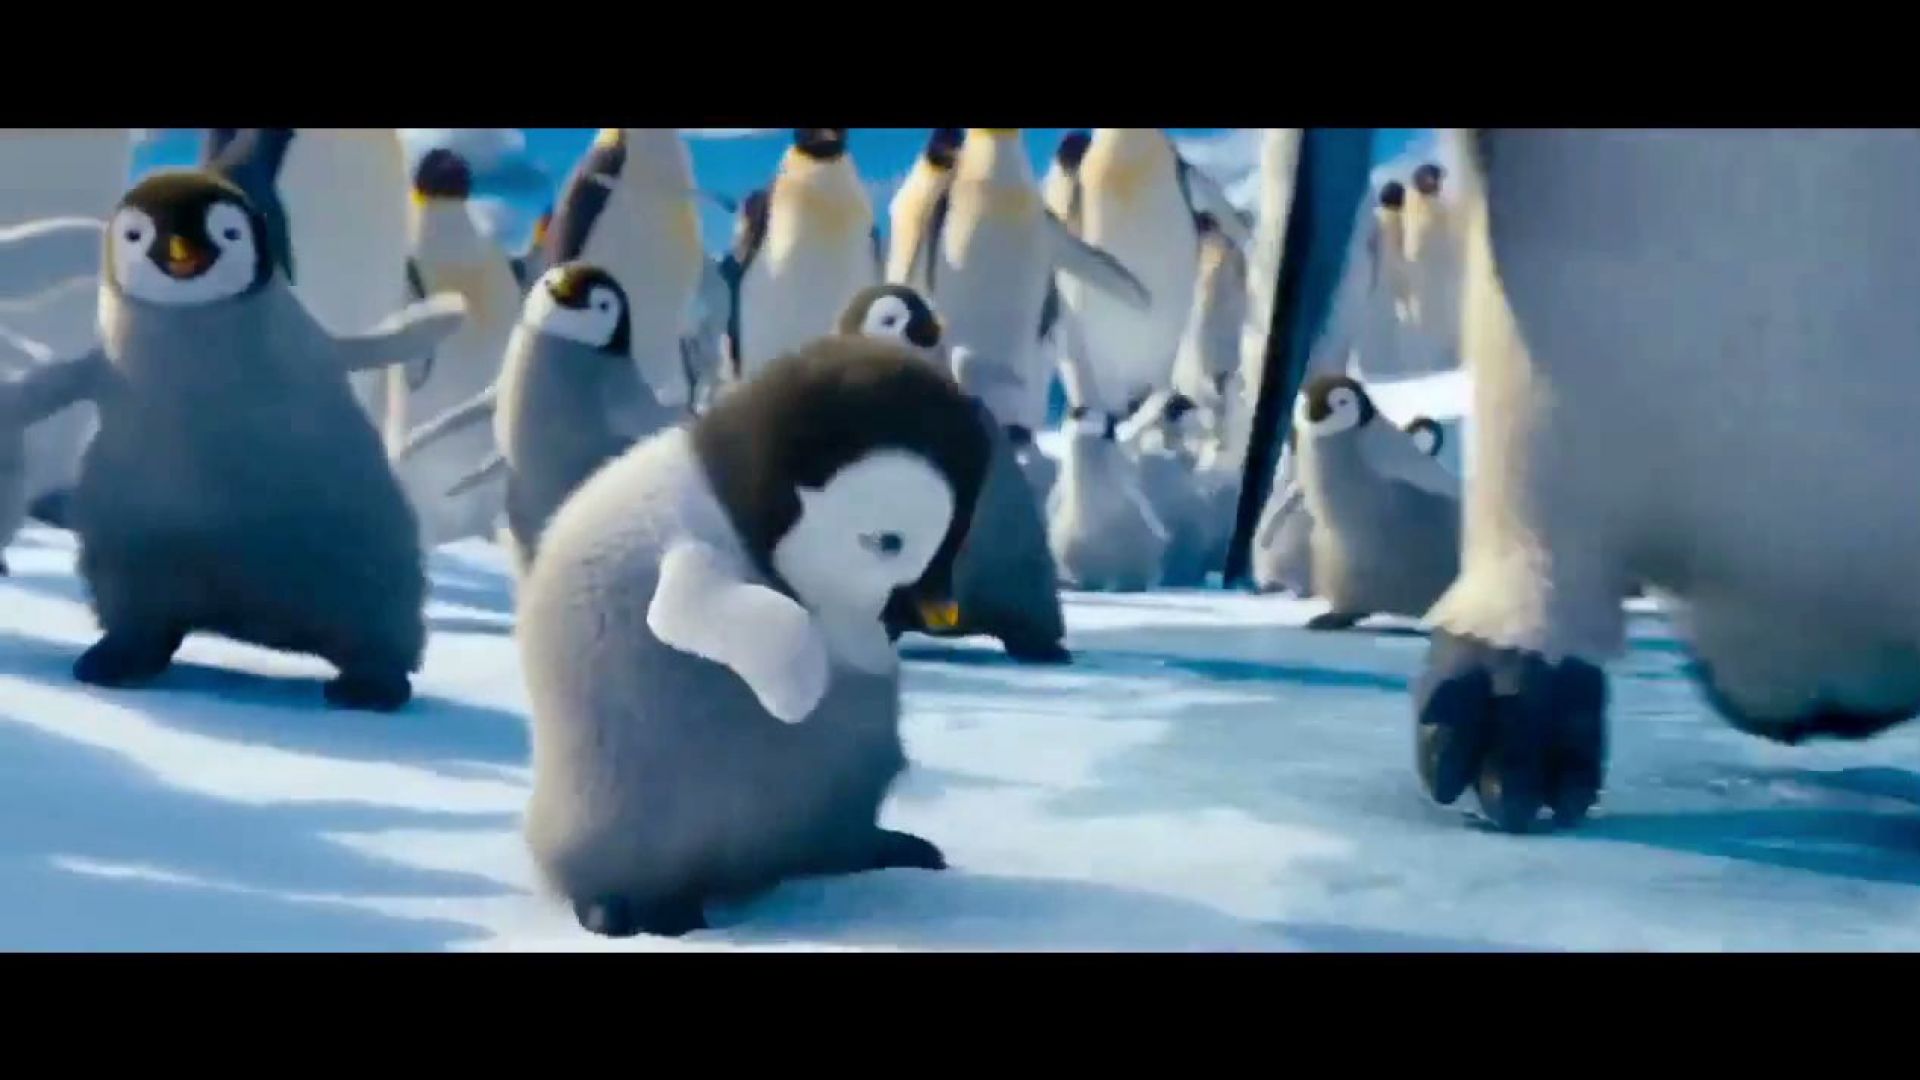 There are plenty of reasons to dance. Happy Feet 2